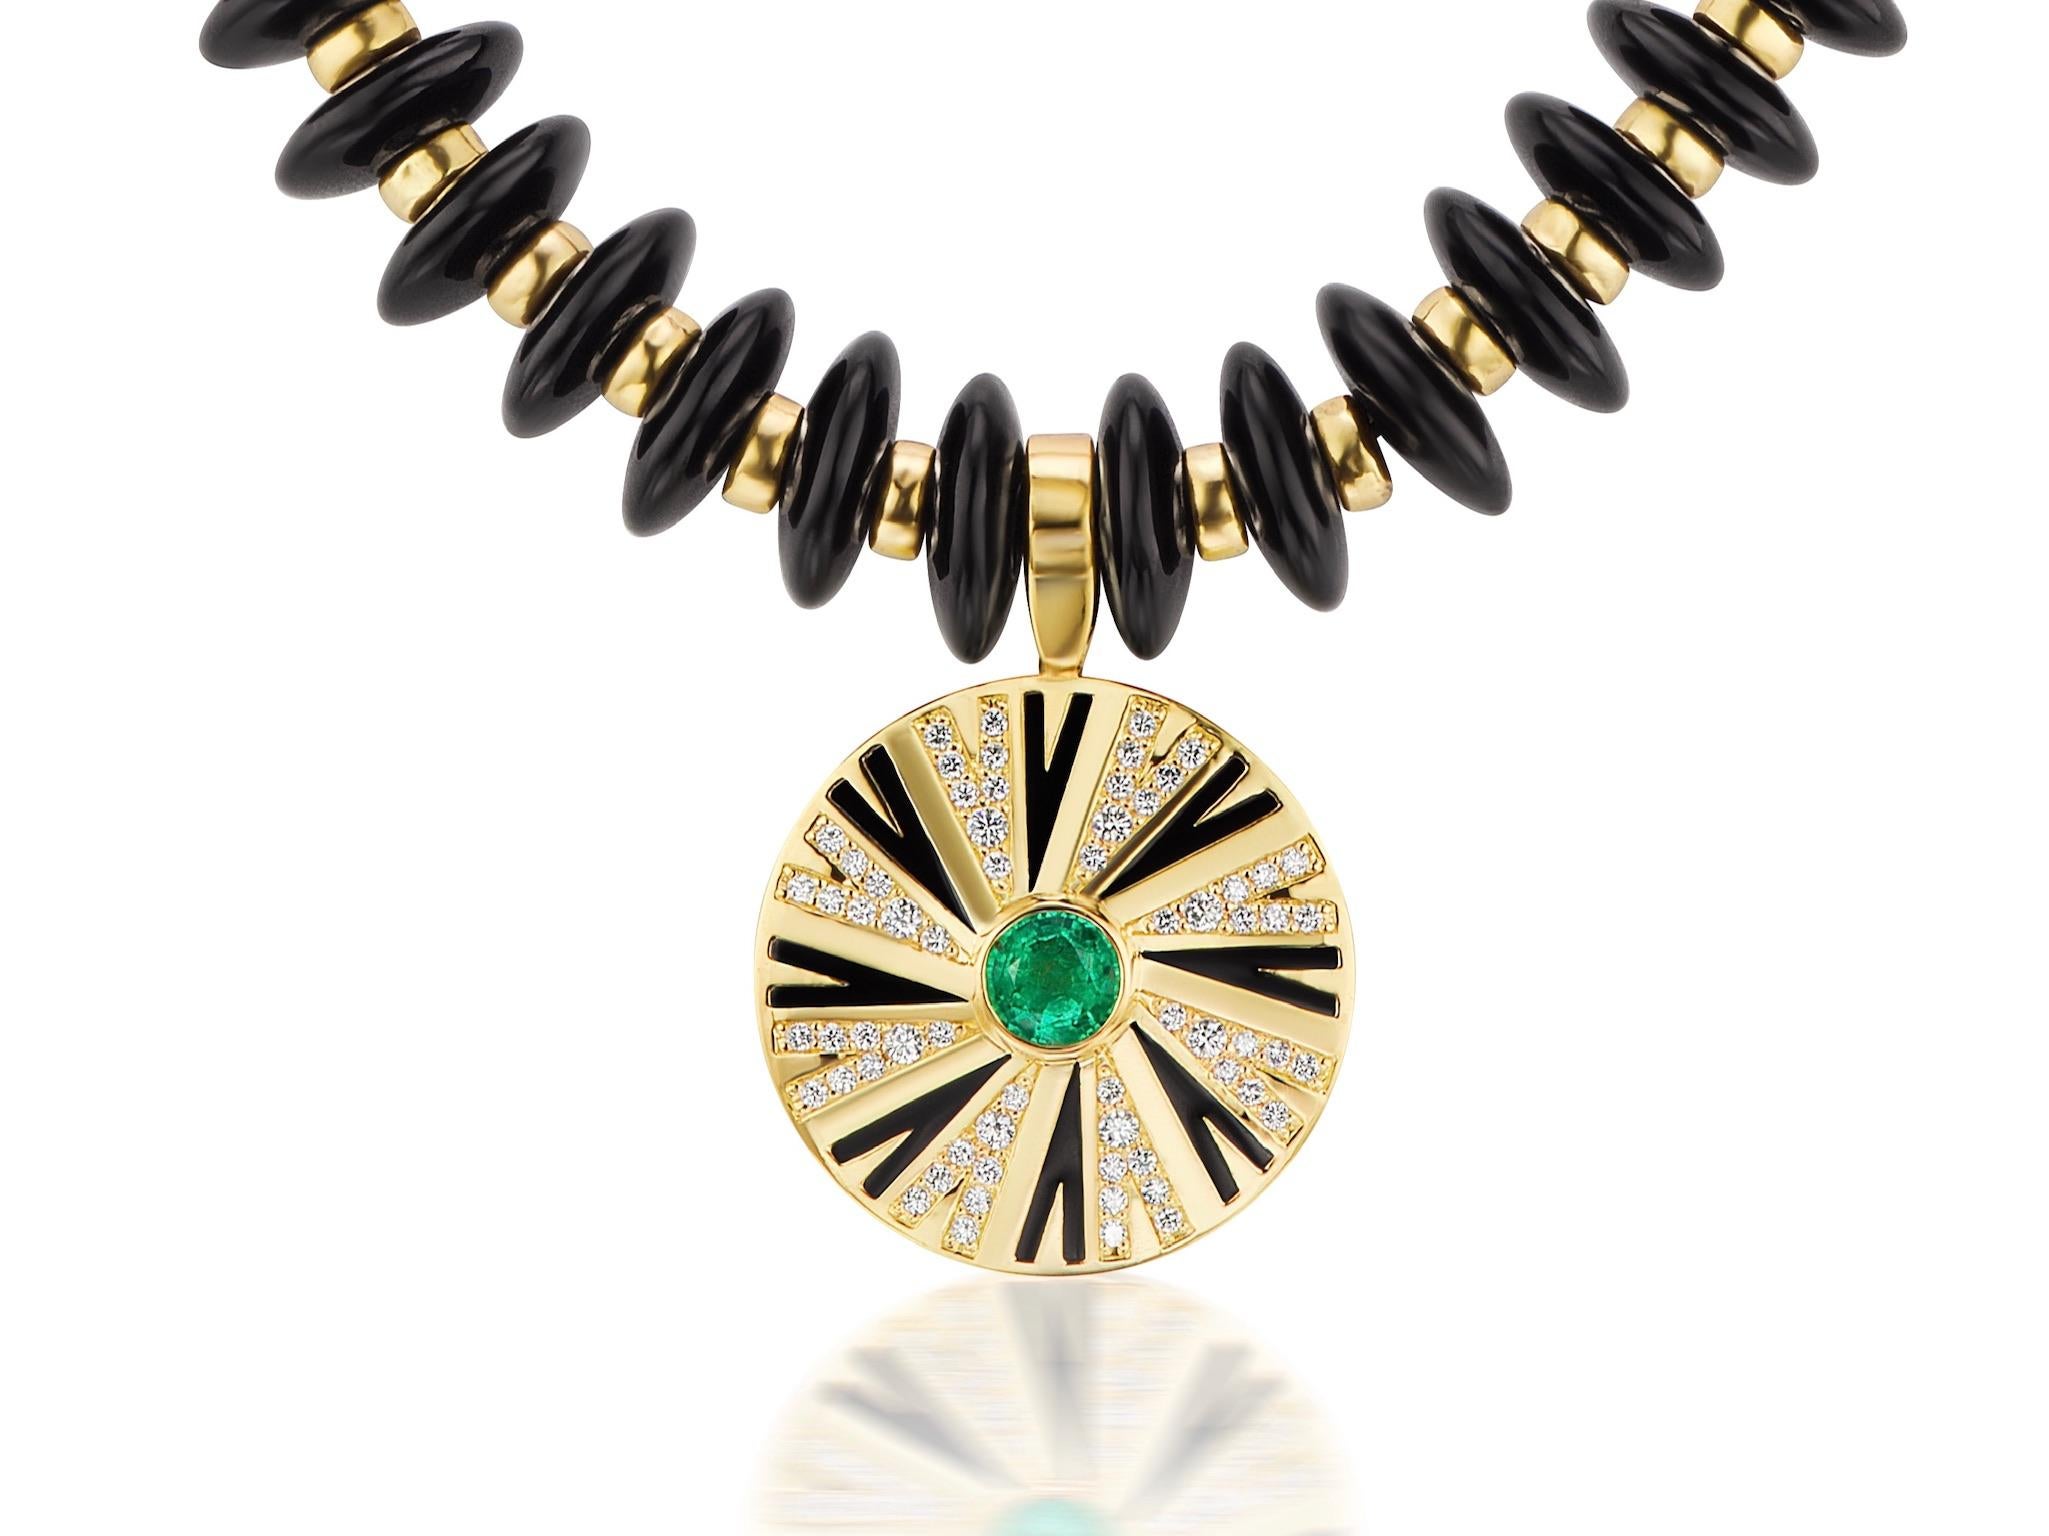 Round Cut Emerald and Diamonds Pendant on Onyx and Gold Necklace